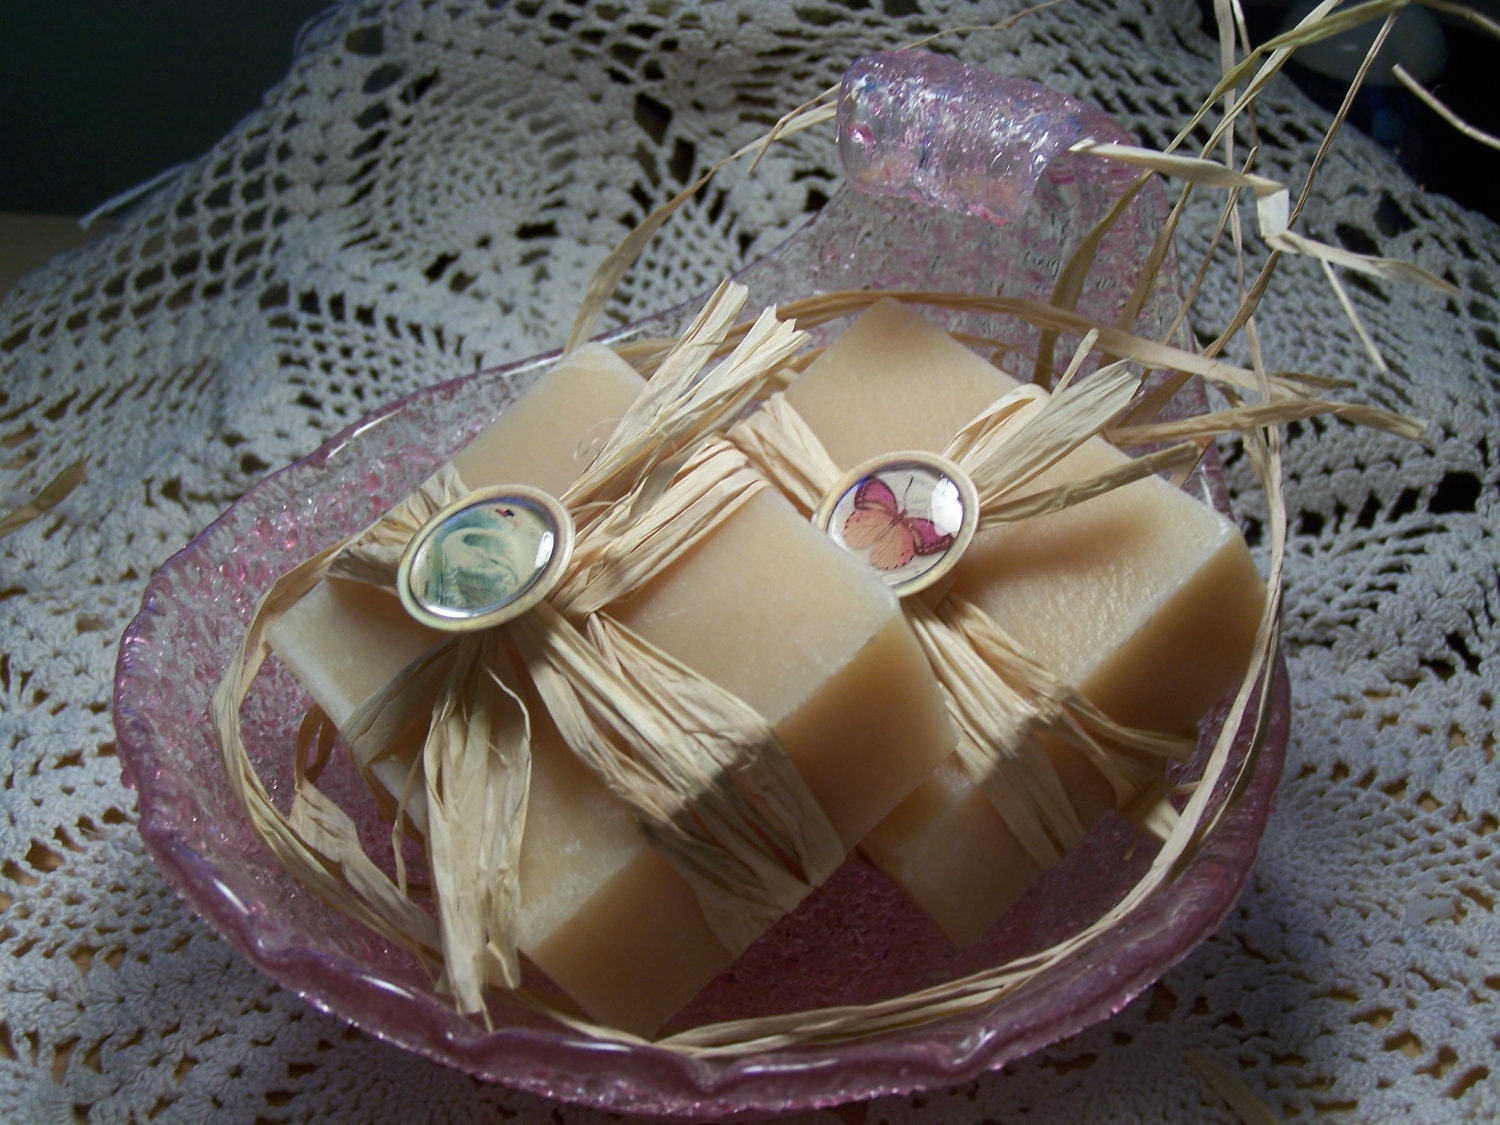 SALE - White tea bamboo soaps - gift set   Shea butter, organic,  handmade soap - reg price 18.00 - CountryChicSoaps